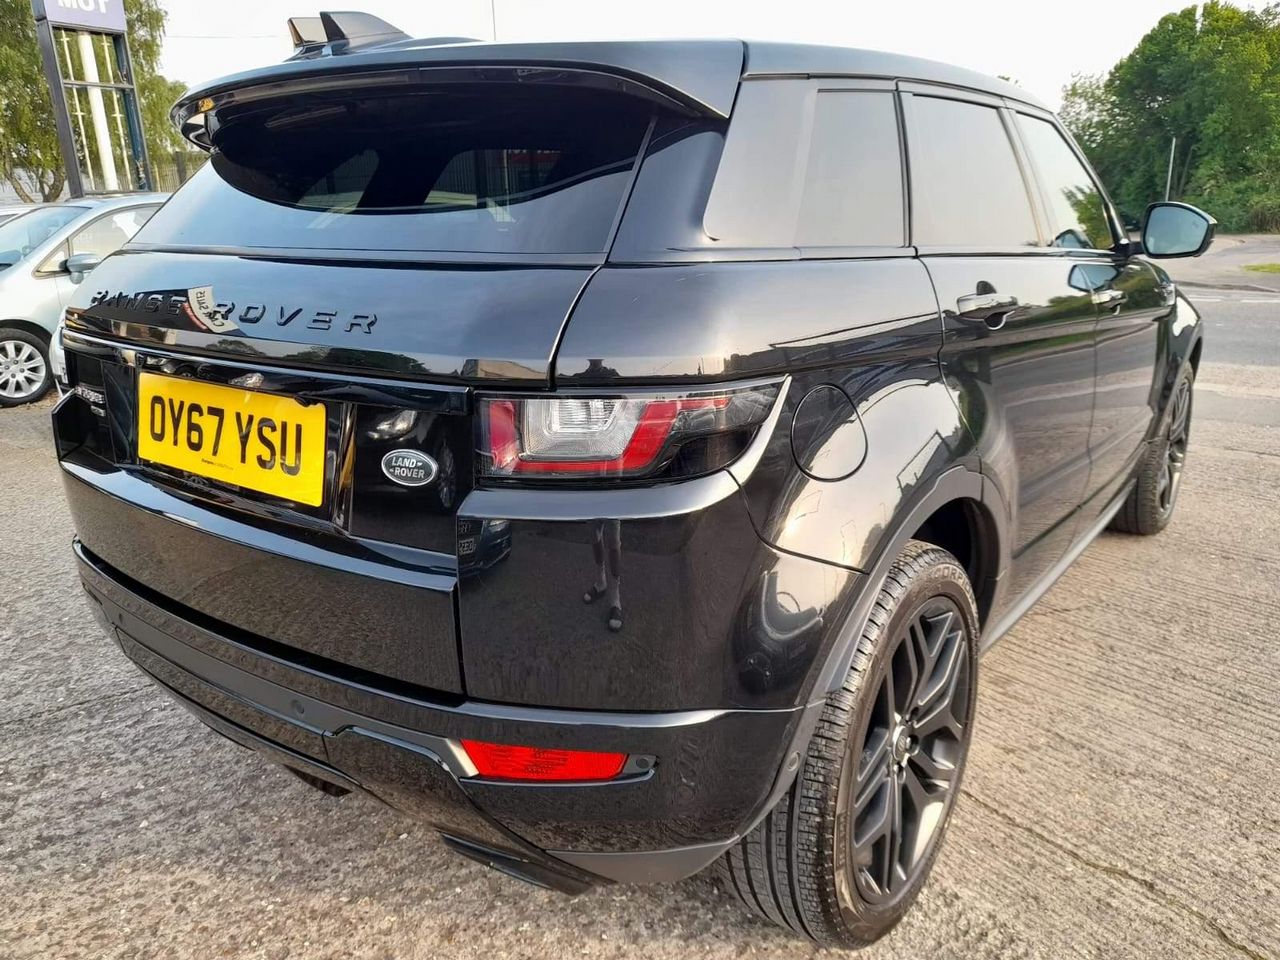 2017 Land Rover Range Rover Evoque 2.0 TD4 HSE Dynamic Auto 4WD Euro 6 (s/s) 5dr - Picture 10 of 53